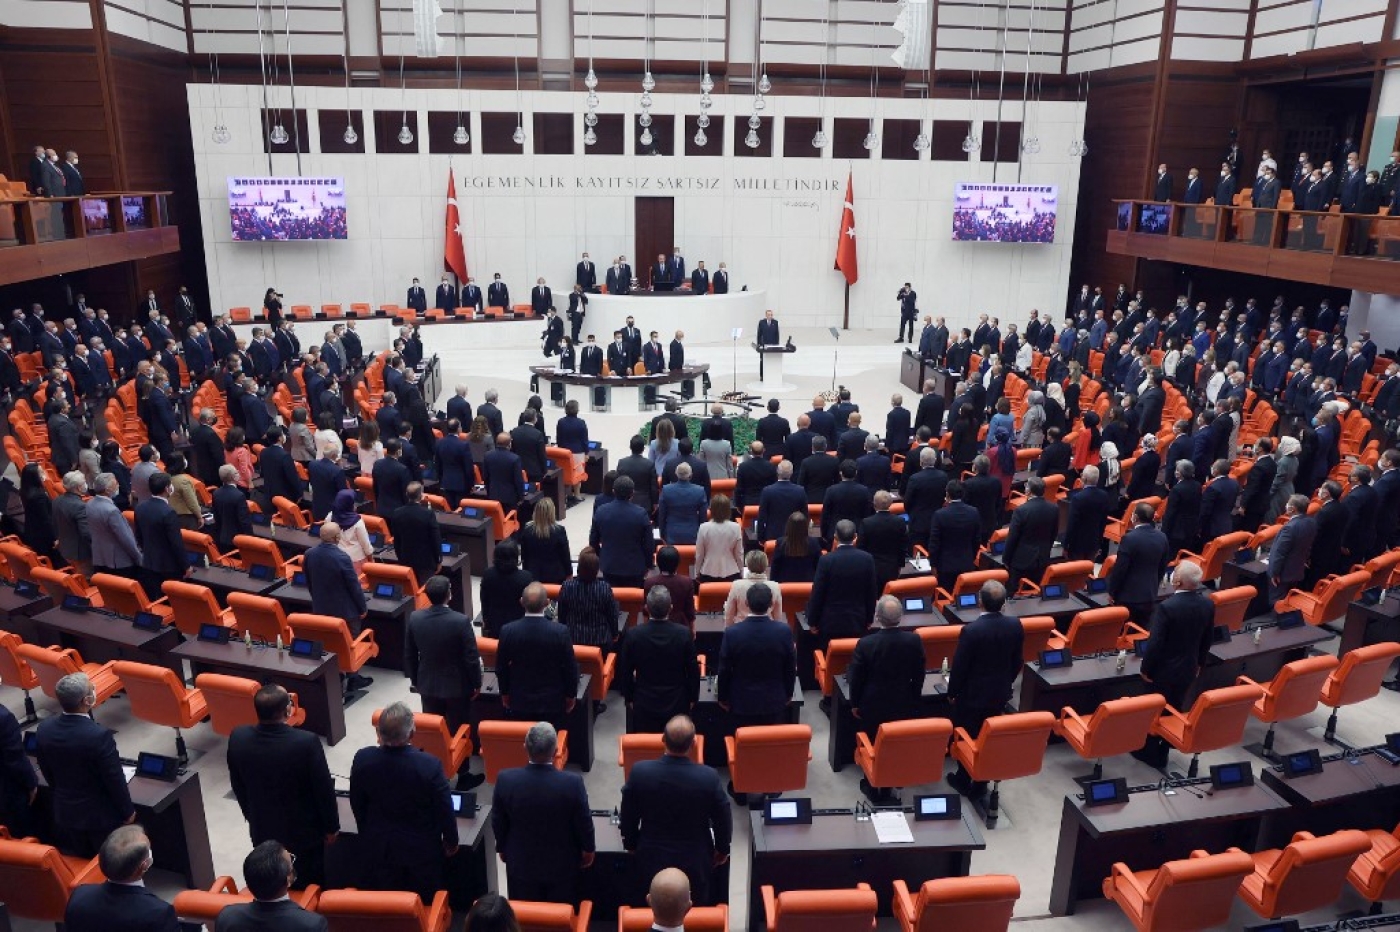 The agreement on carbon emissions was ratified unanimously by the 353 members of Turkey's Parliament.